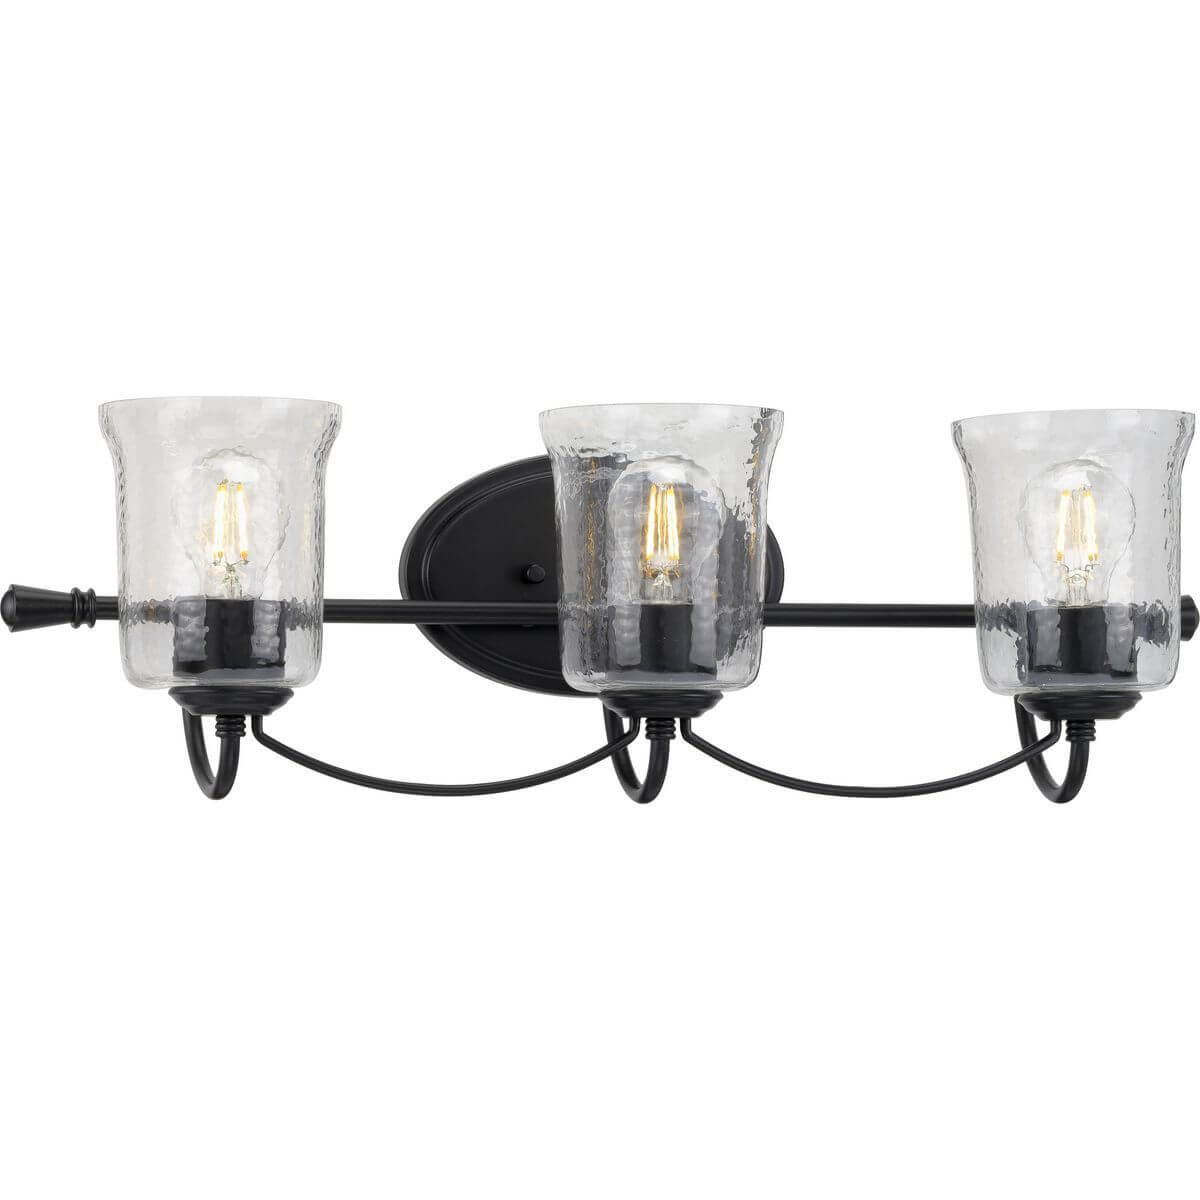 Progress Lighting Bowman 3 Light 25 inch Bath Vanity Light in Matte Black with Clear Chiseled Glass Shade P300255-031